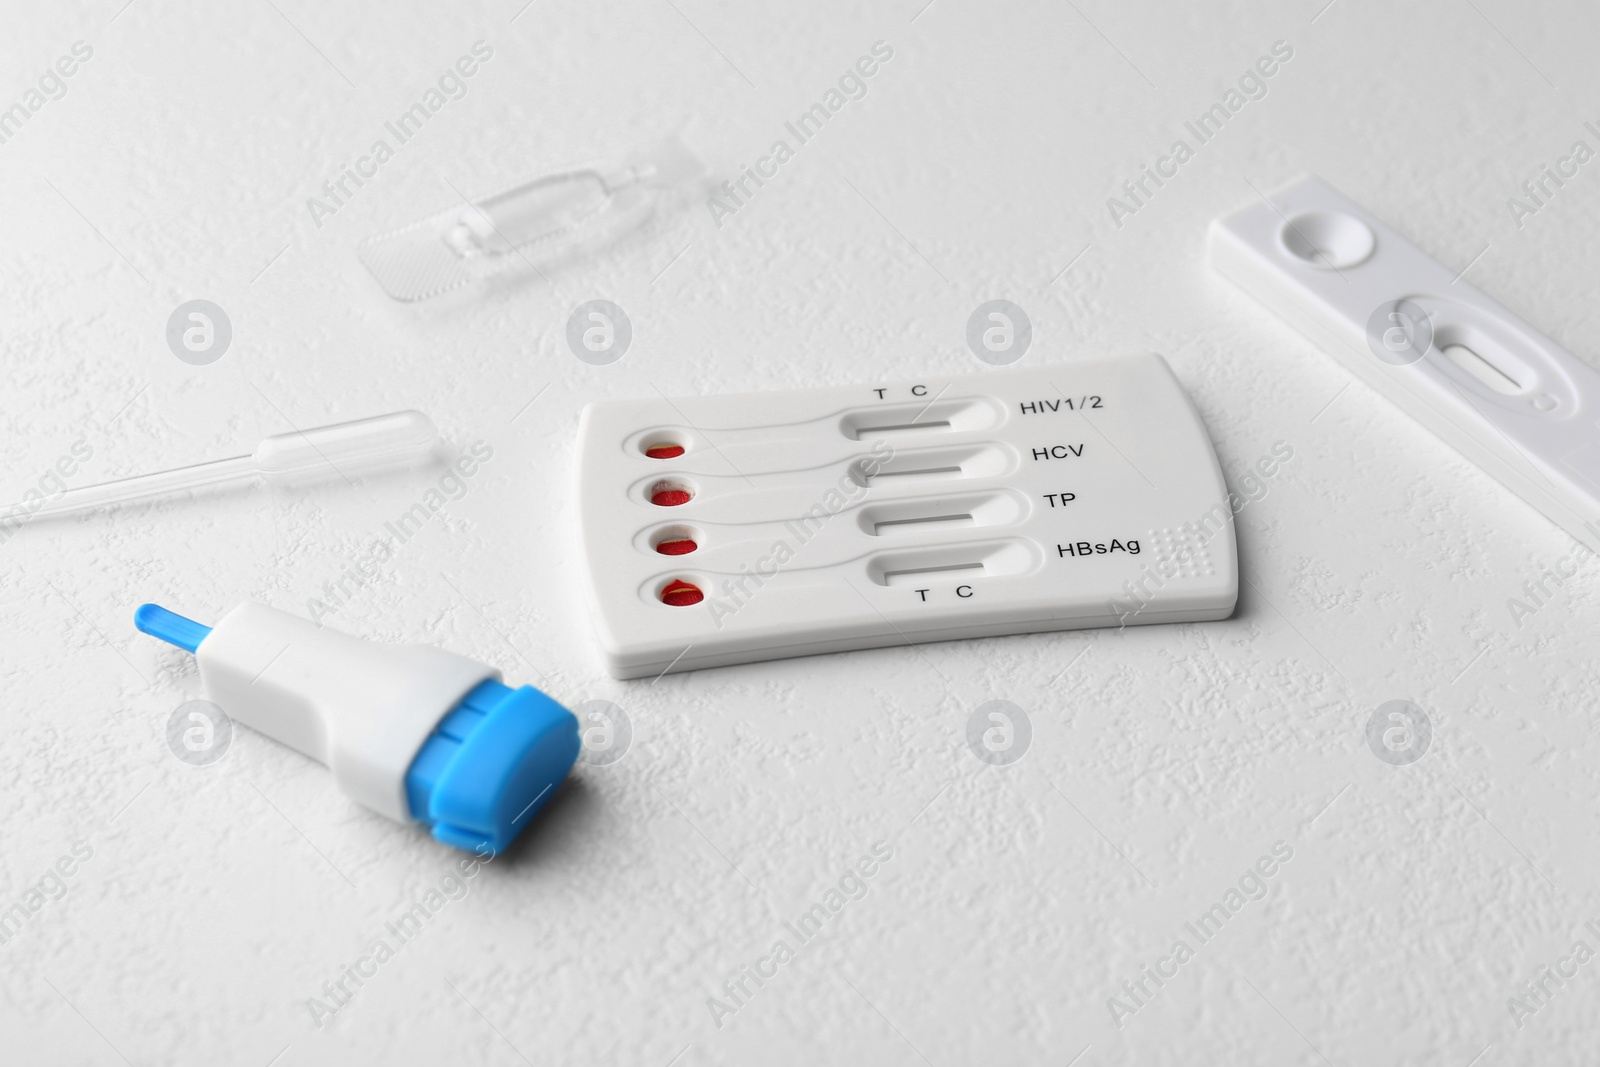 Photo of Disposable express test kit on white table